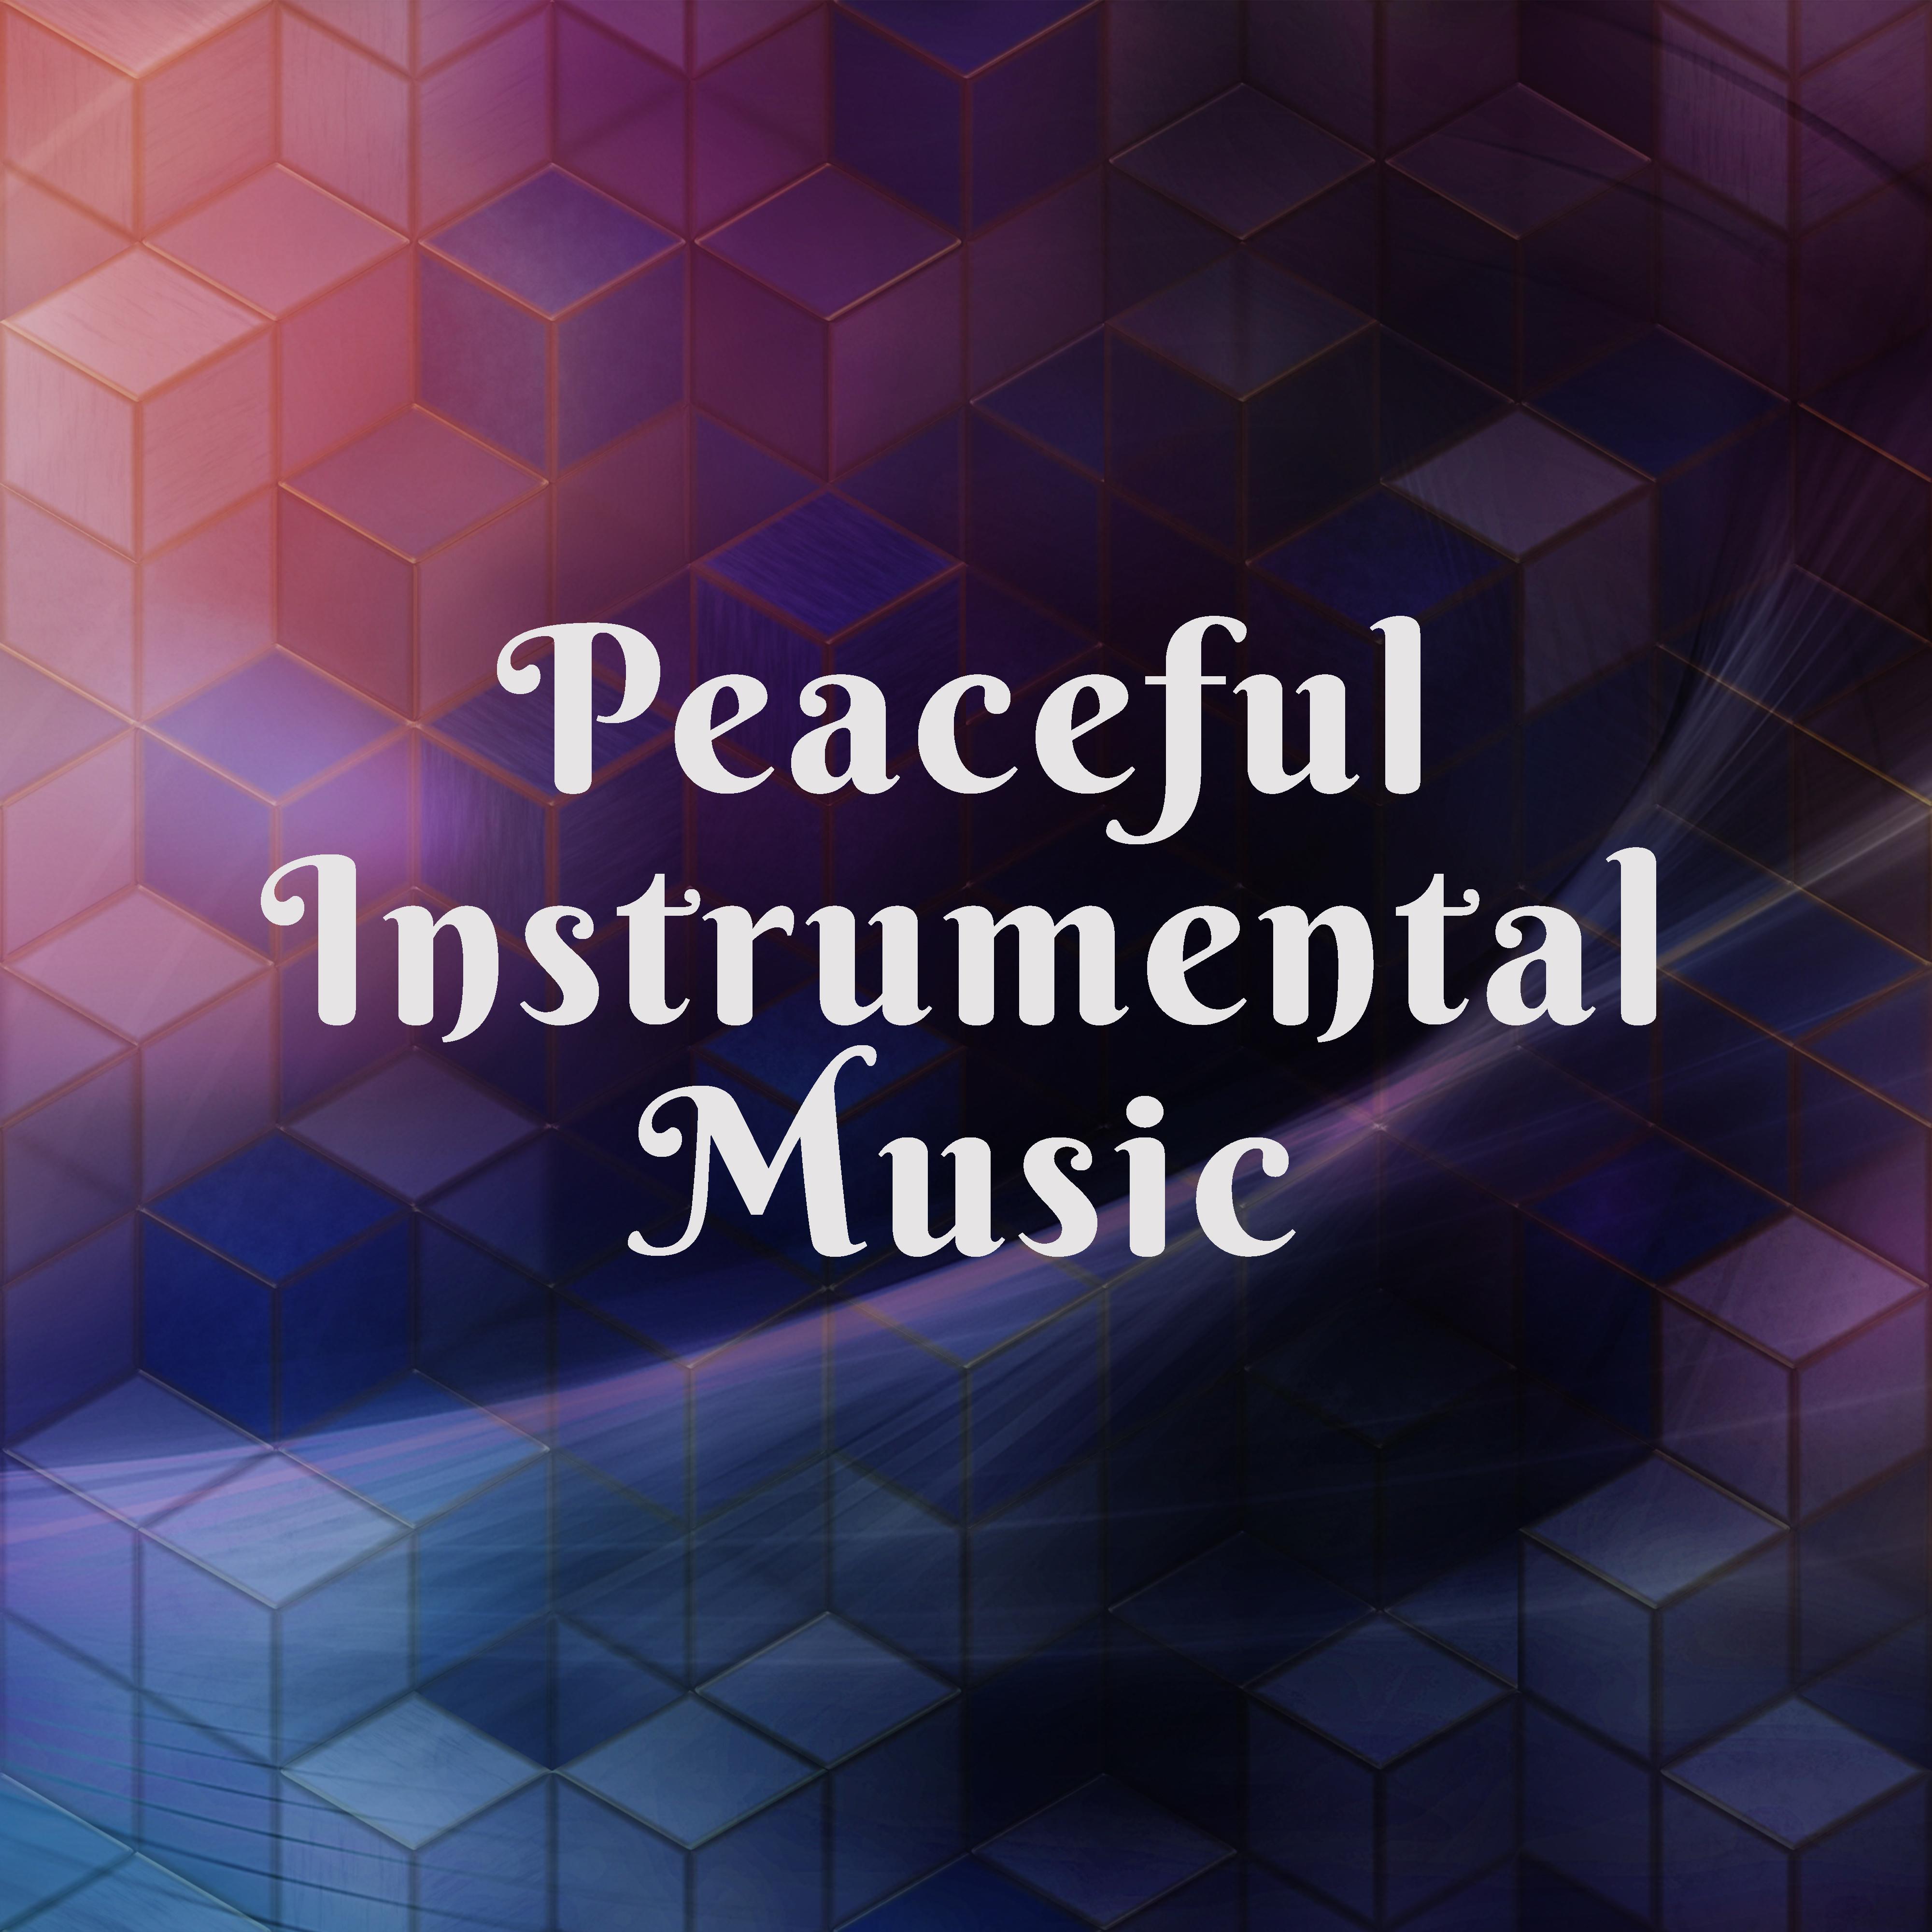 Peaceful Instrumental Music – Smooth Jazz Music, Relaxing Sounds, Piano Bar, Easy Listening